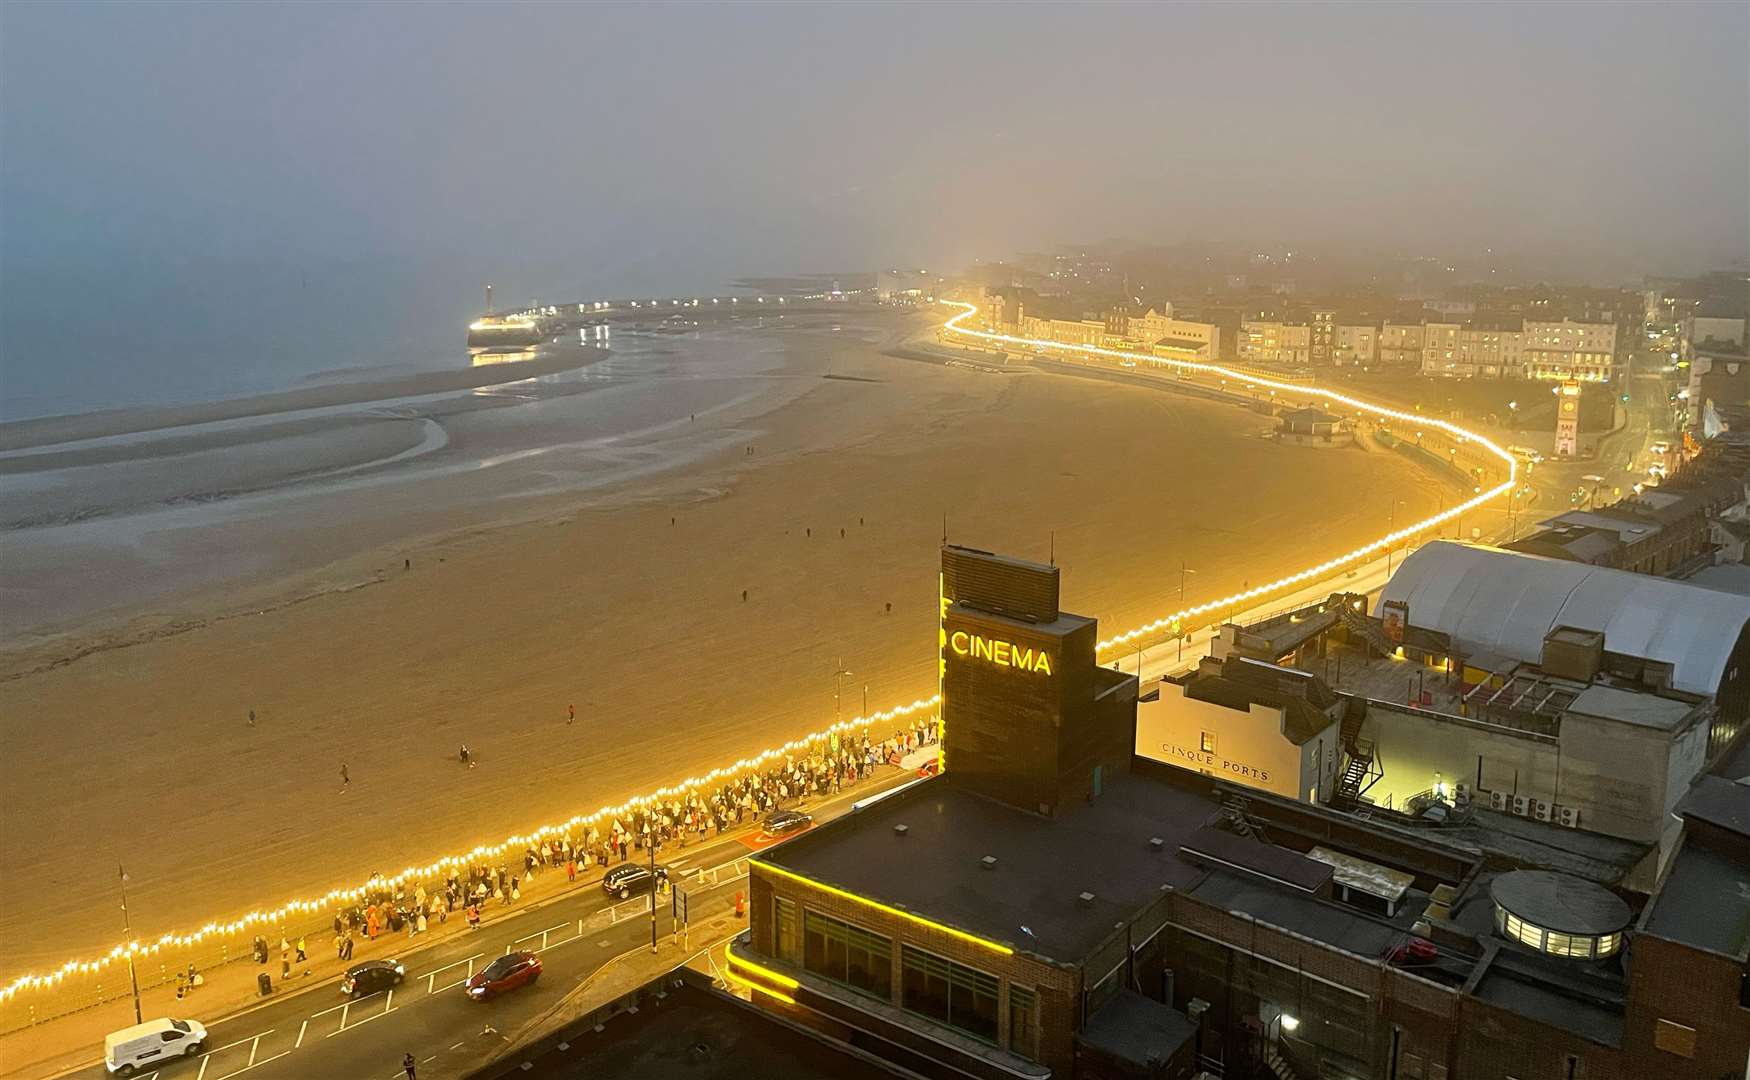 The lights put up by the production crew illuminated the promenade during filming. Picture: Paul Johnson